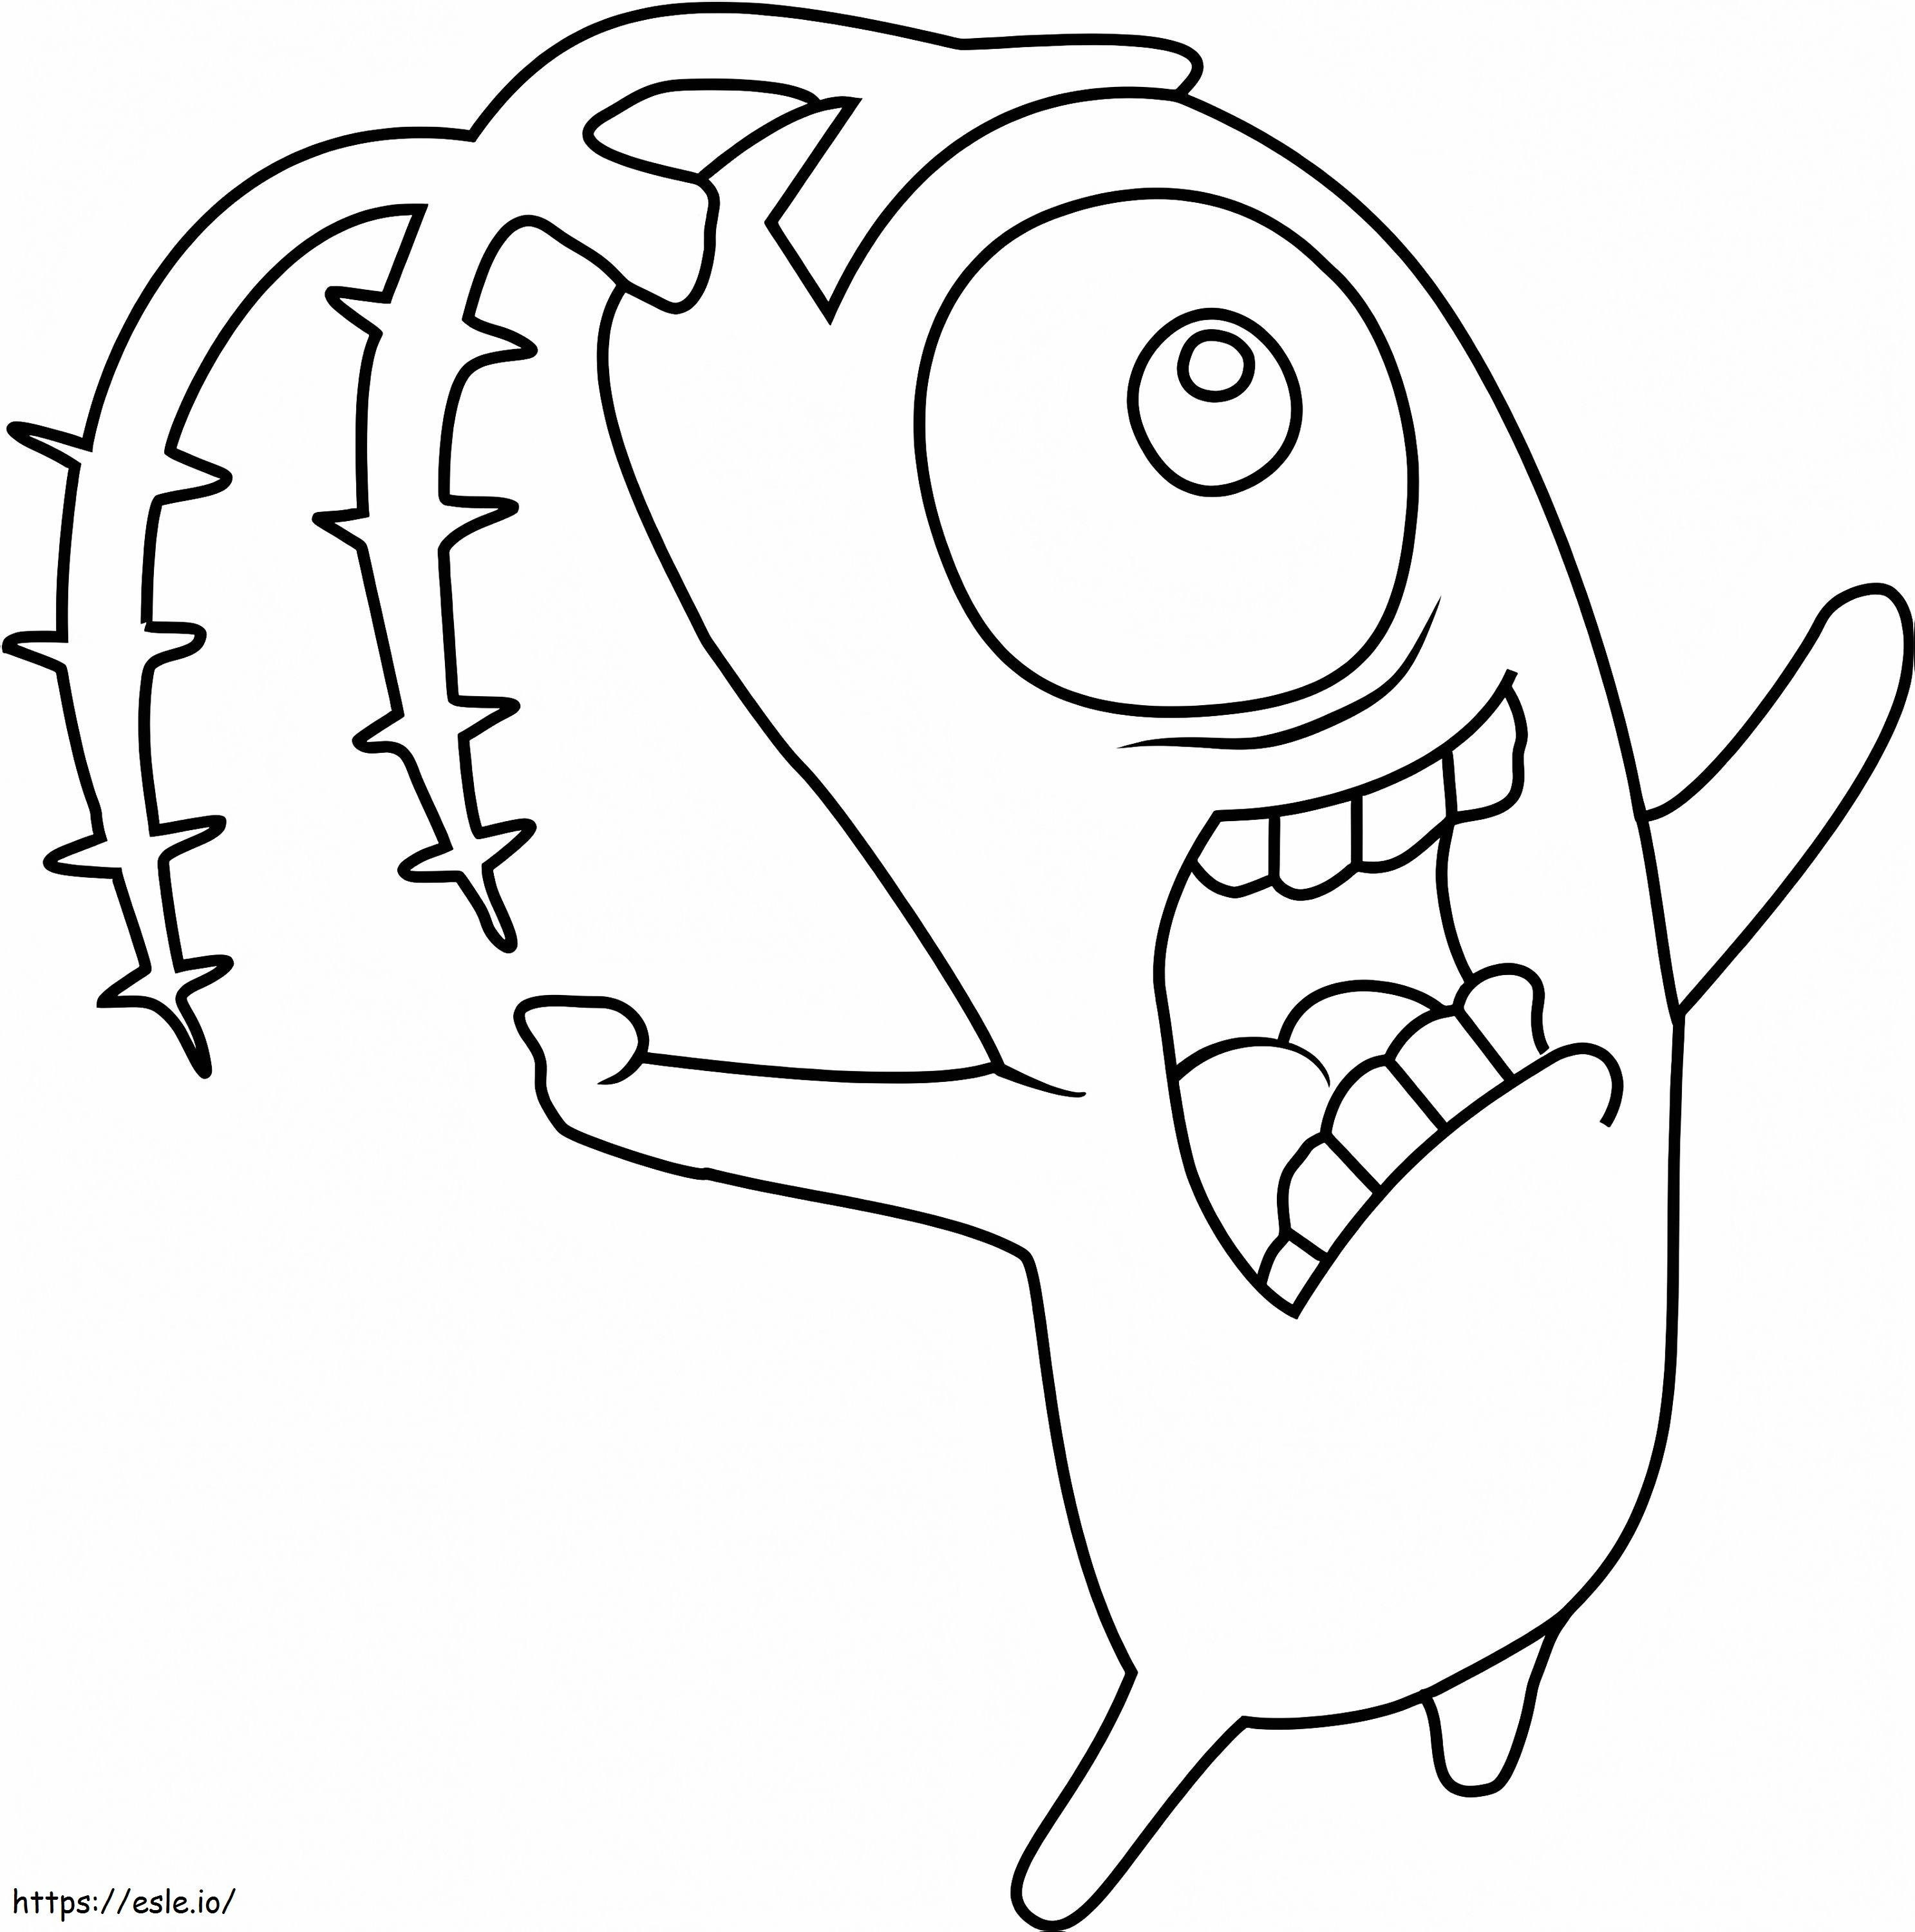 Funny Plankton coloring page